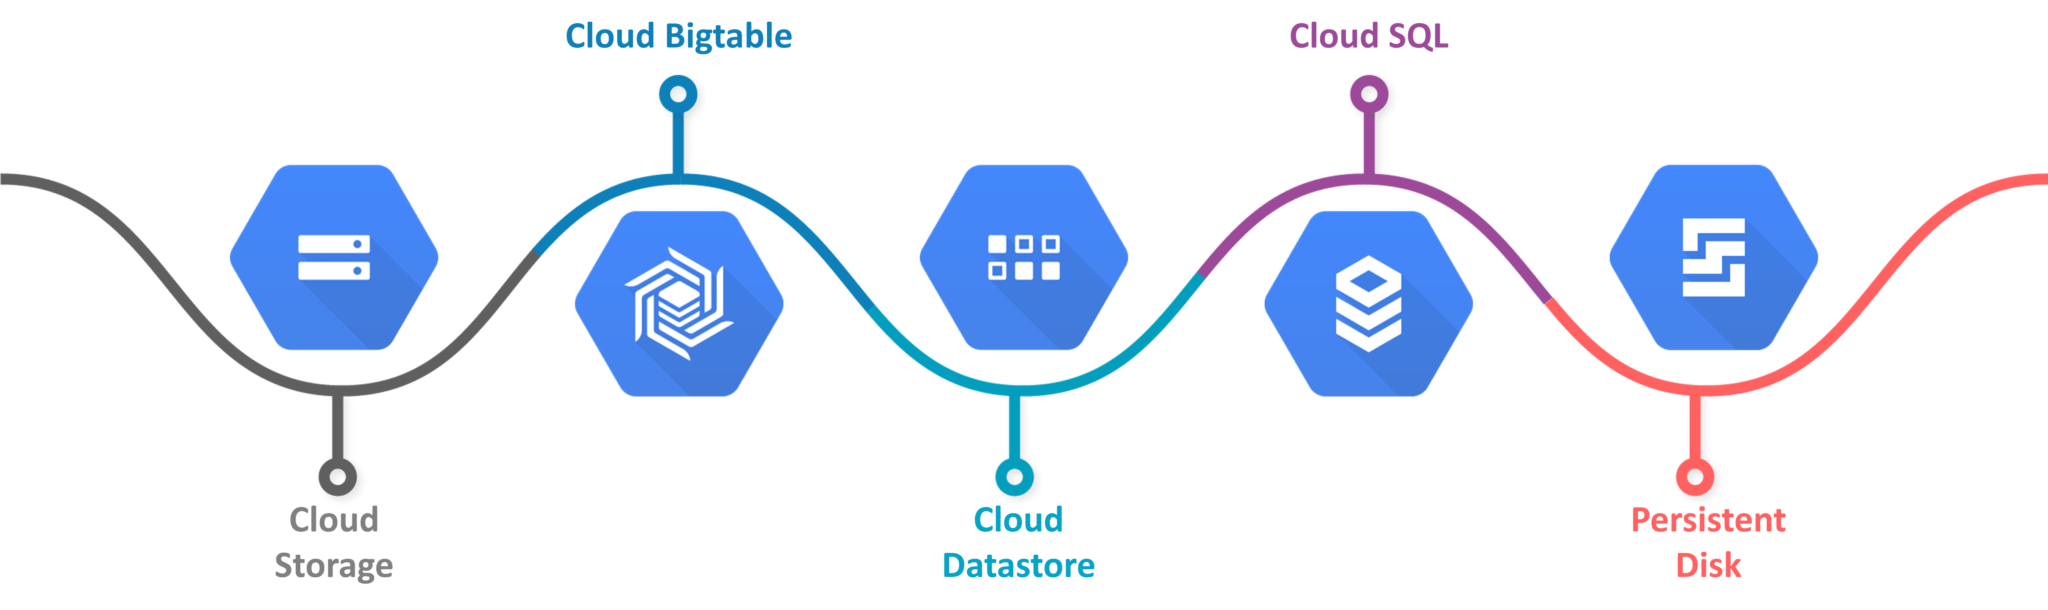 Google Cloud Services - Storage and Database